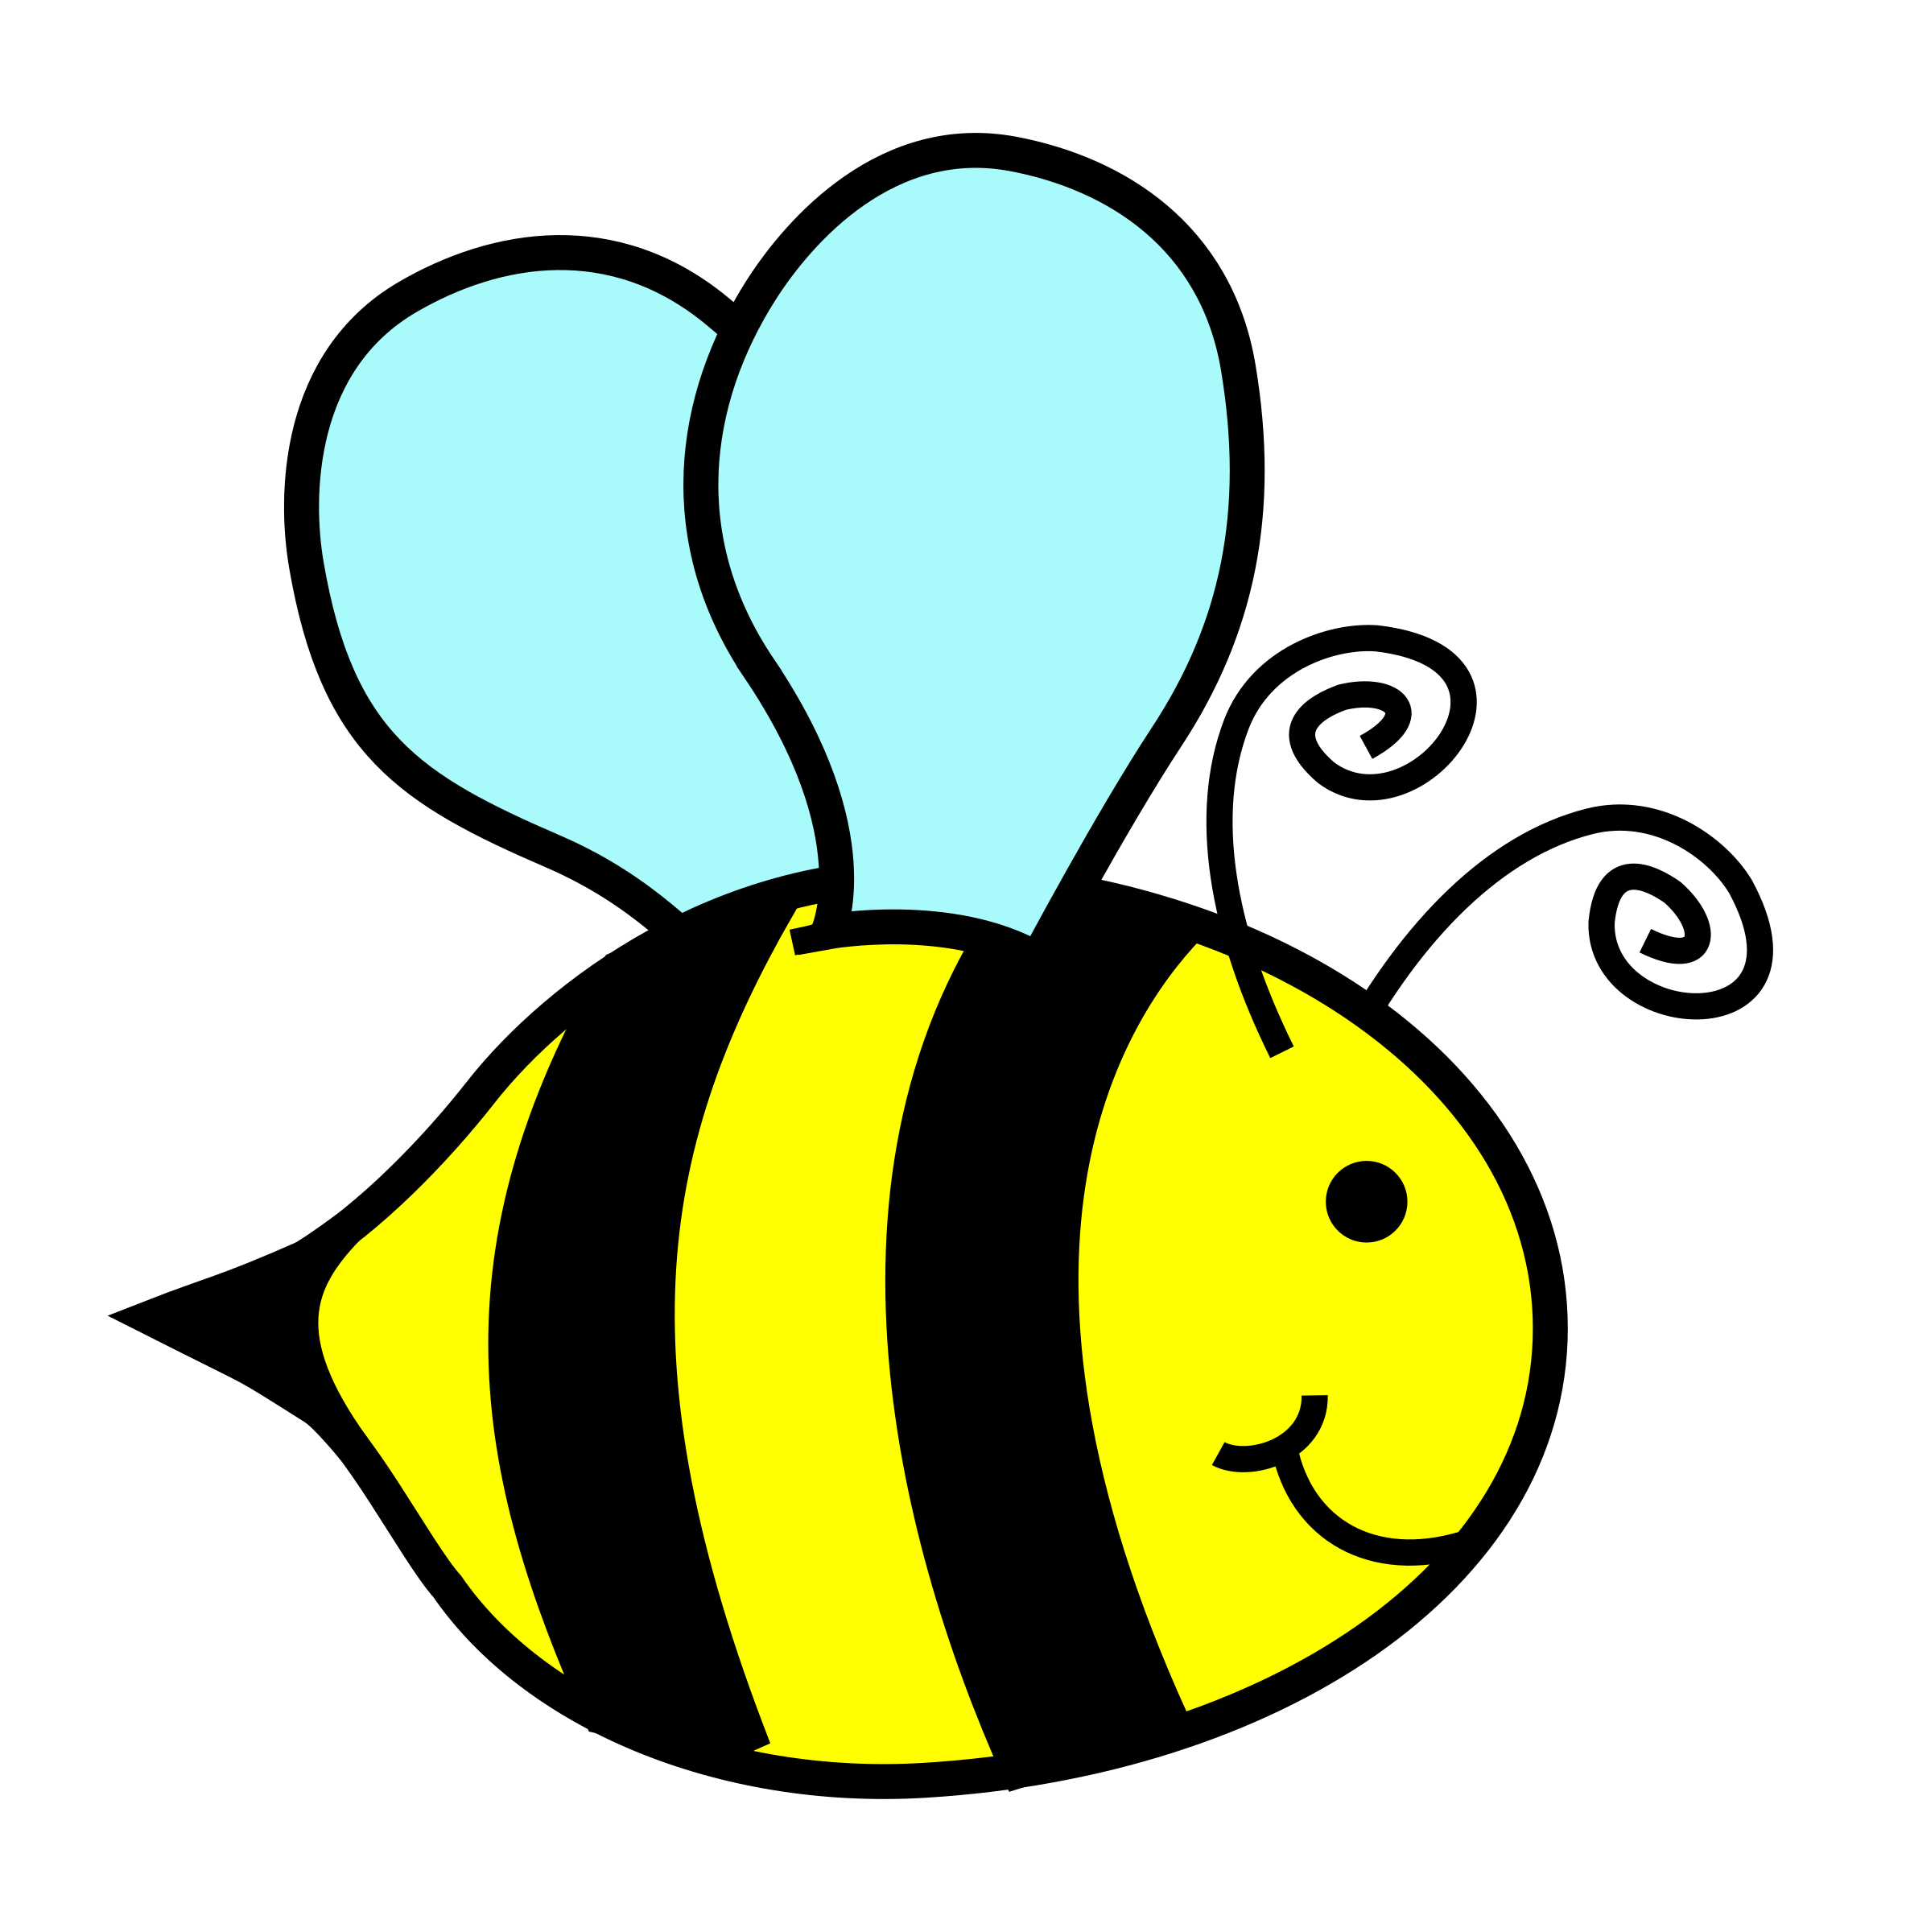 Clipart Bumble Bee